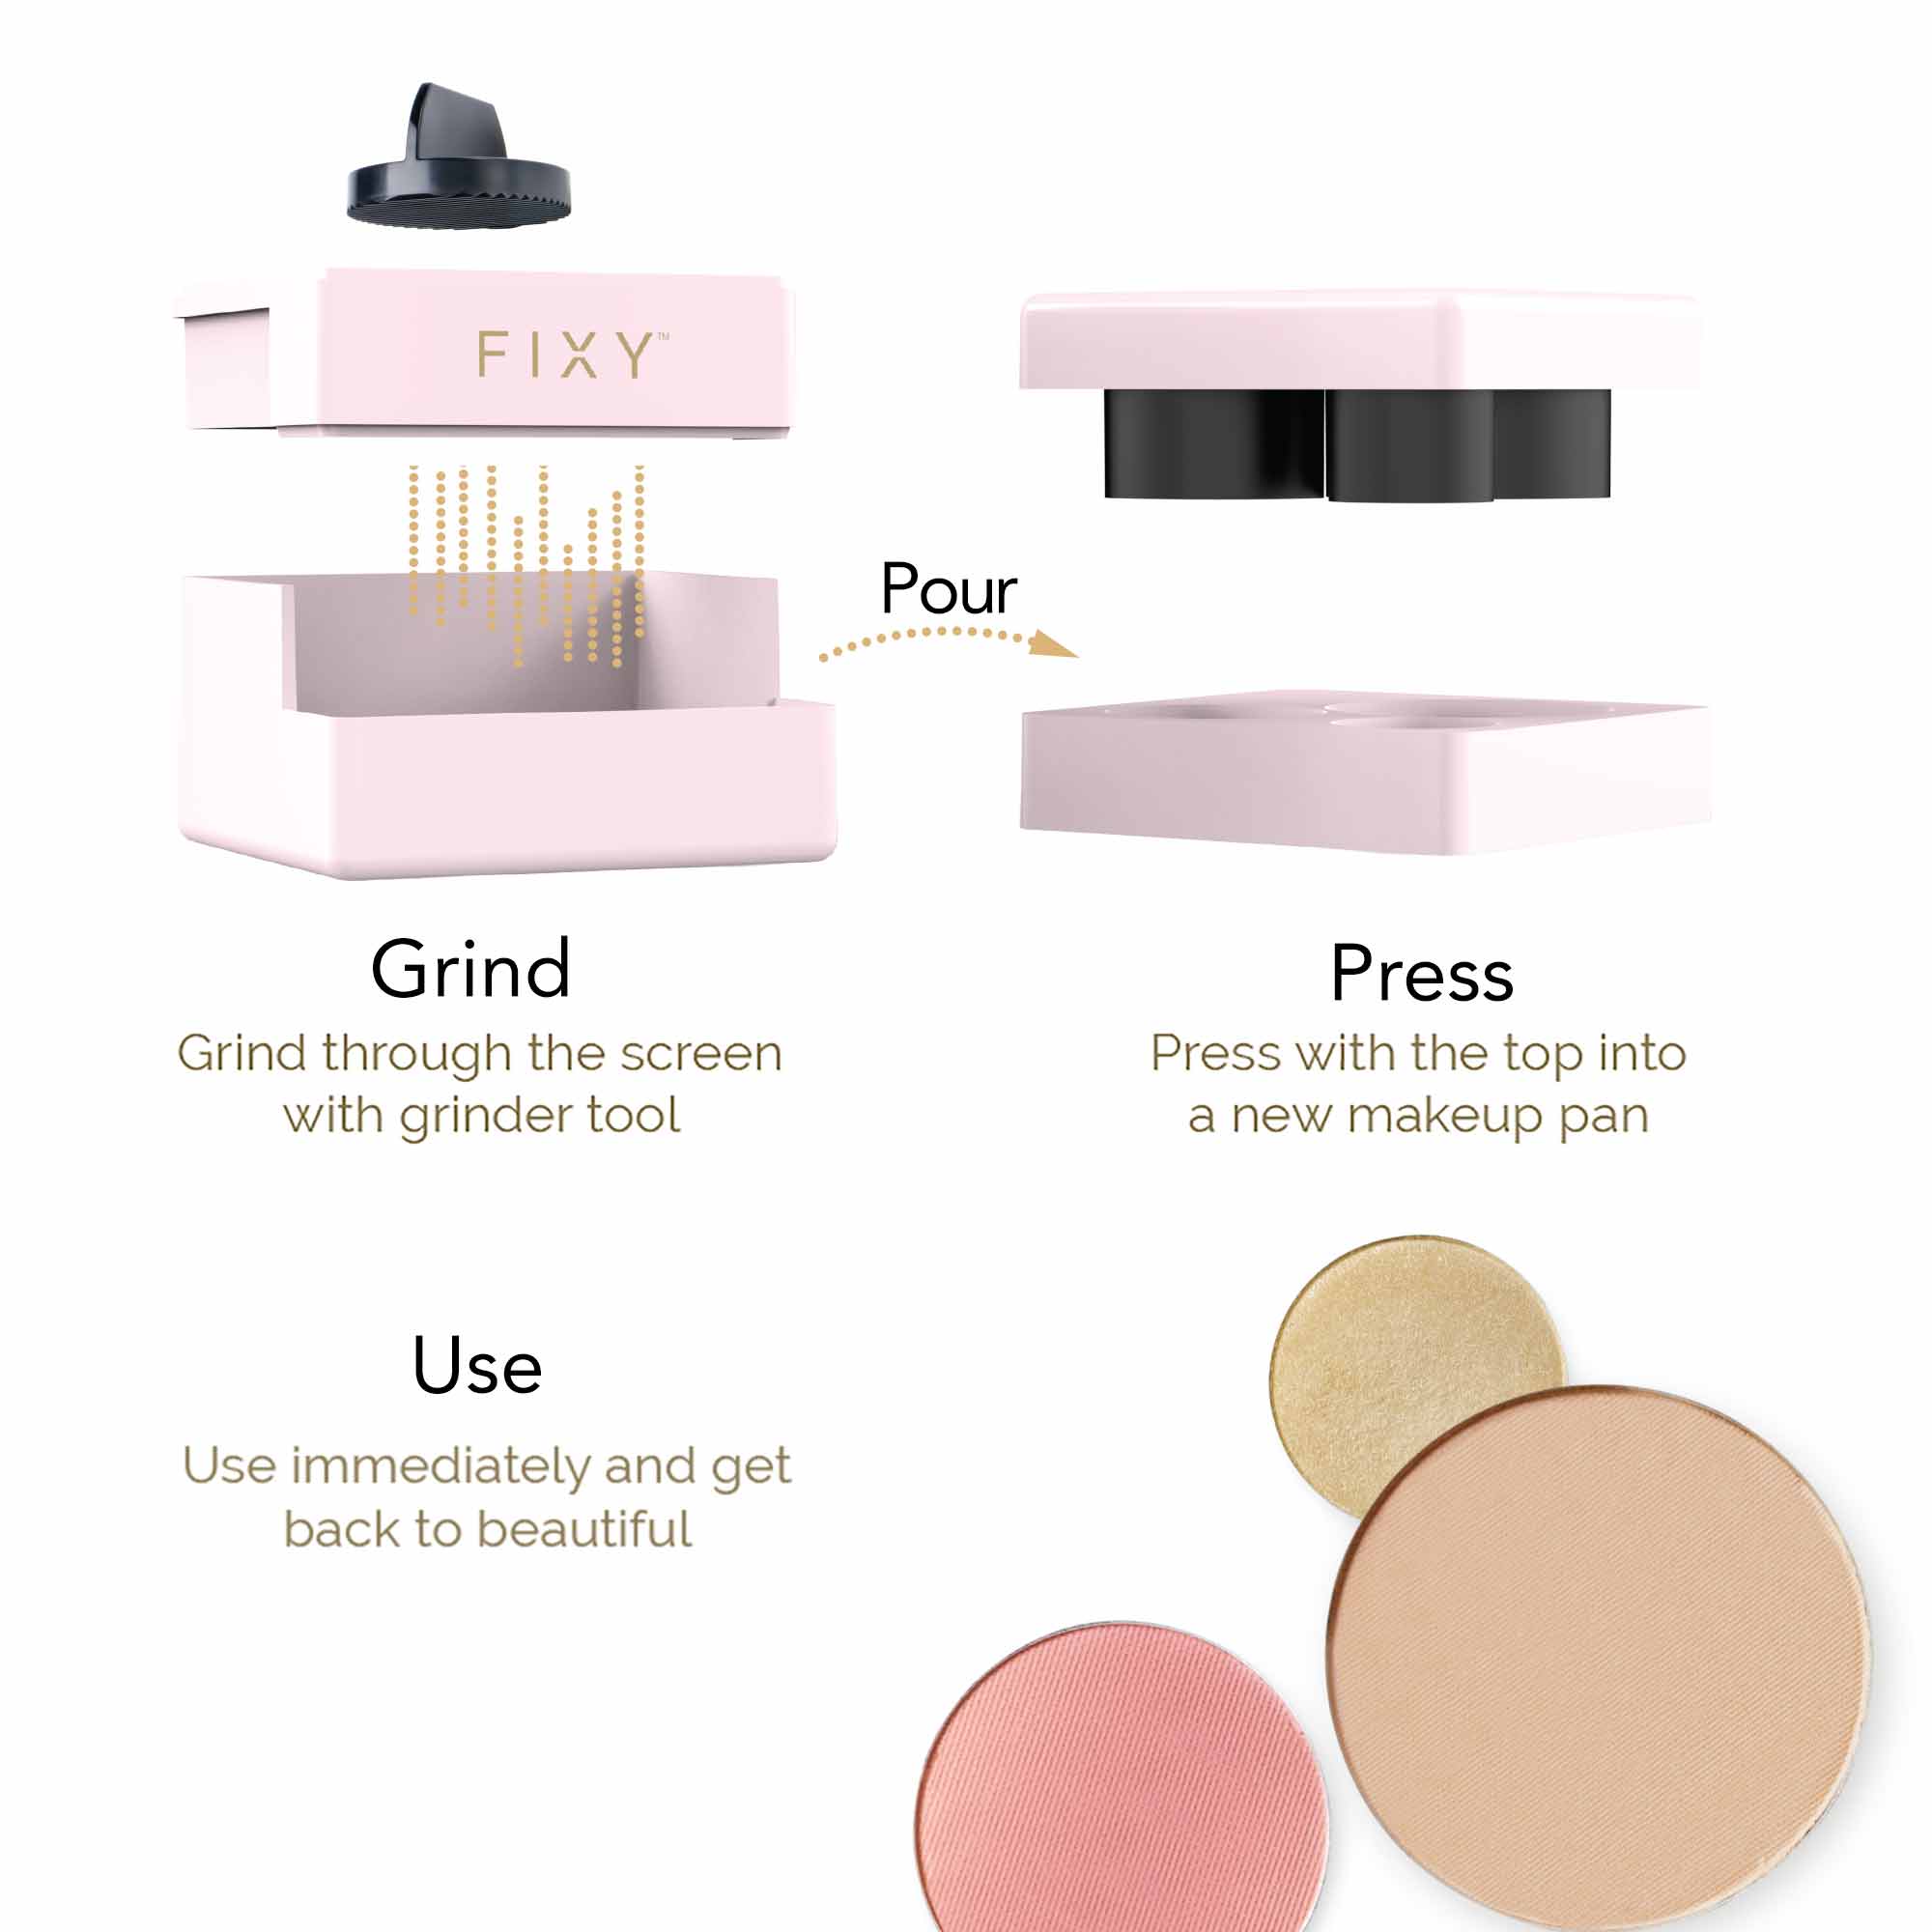 tep-by-step illustration of the FIXY Makeup Repressing Kit. &#39;Grind&#39; step showing grinding of makeup, &#39;Pour&#39; indicates transferring makeup to a pan, &#39;Press&#39; step depicts pressing makeup into the pan, and &#39;Use&#39; shows the finished pressed makeup pans ready for application.